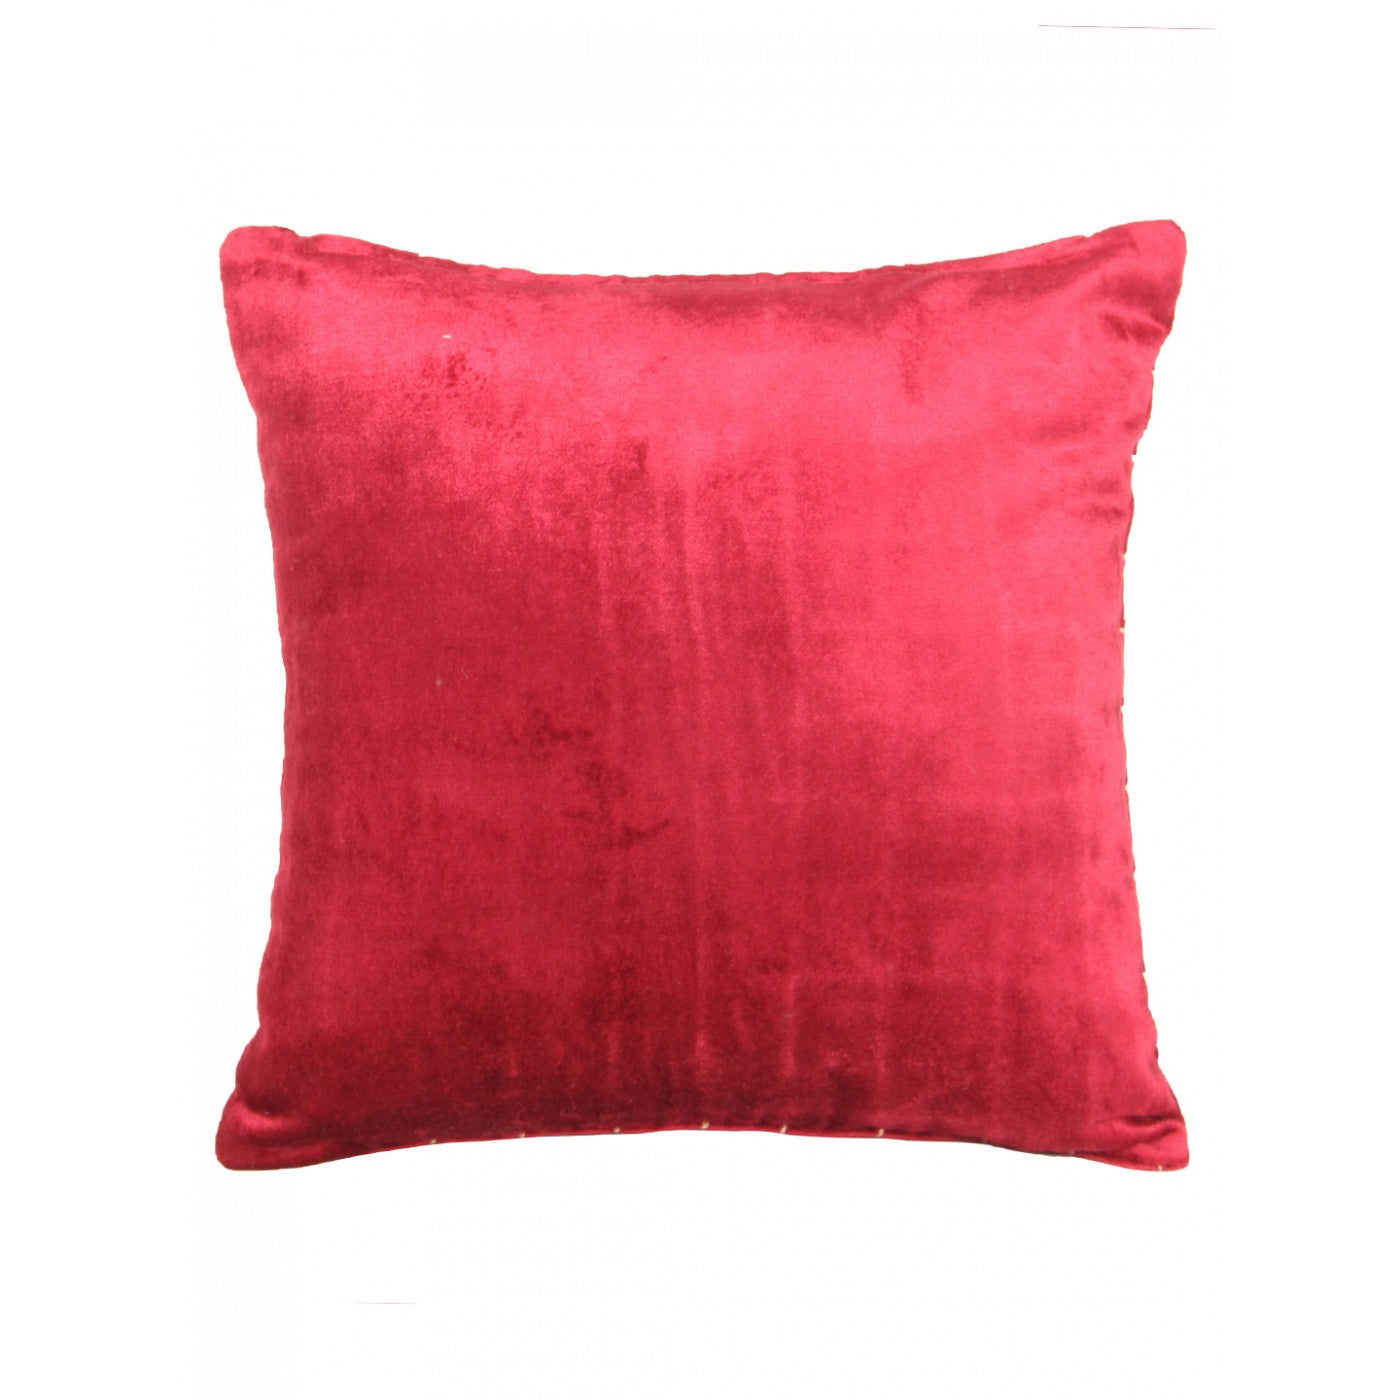 Regal Elegance: 12x12 Inch Royal Red Velvet Embroidered Cushion Cover